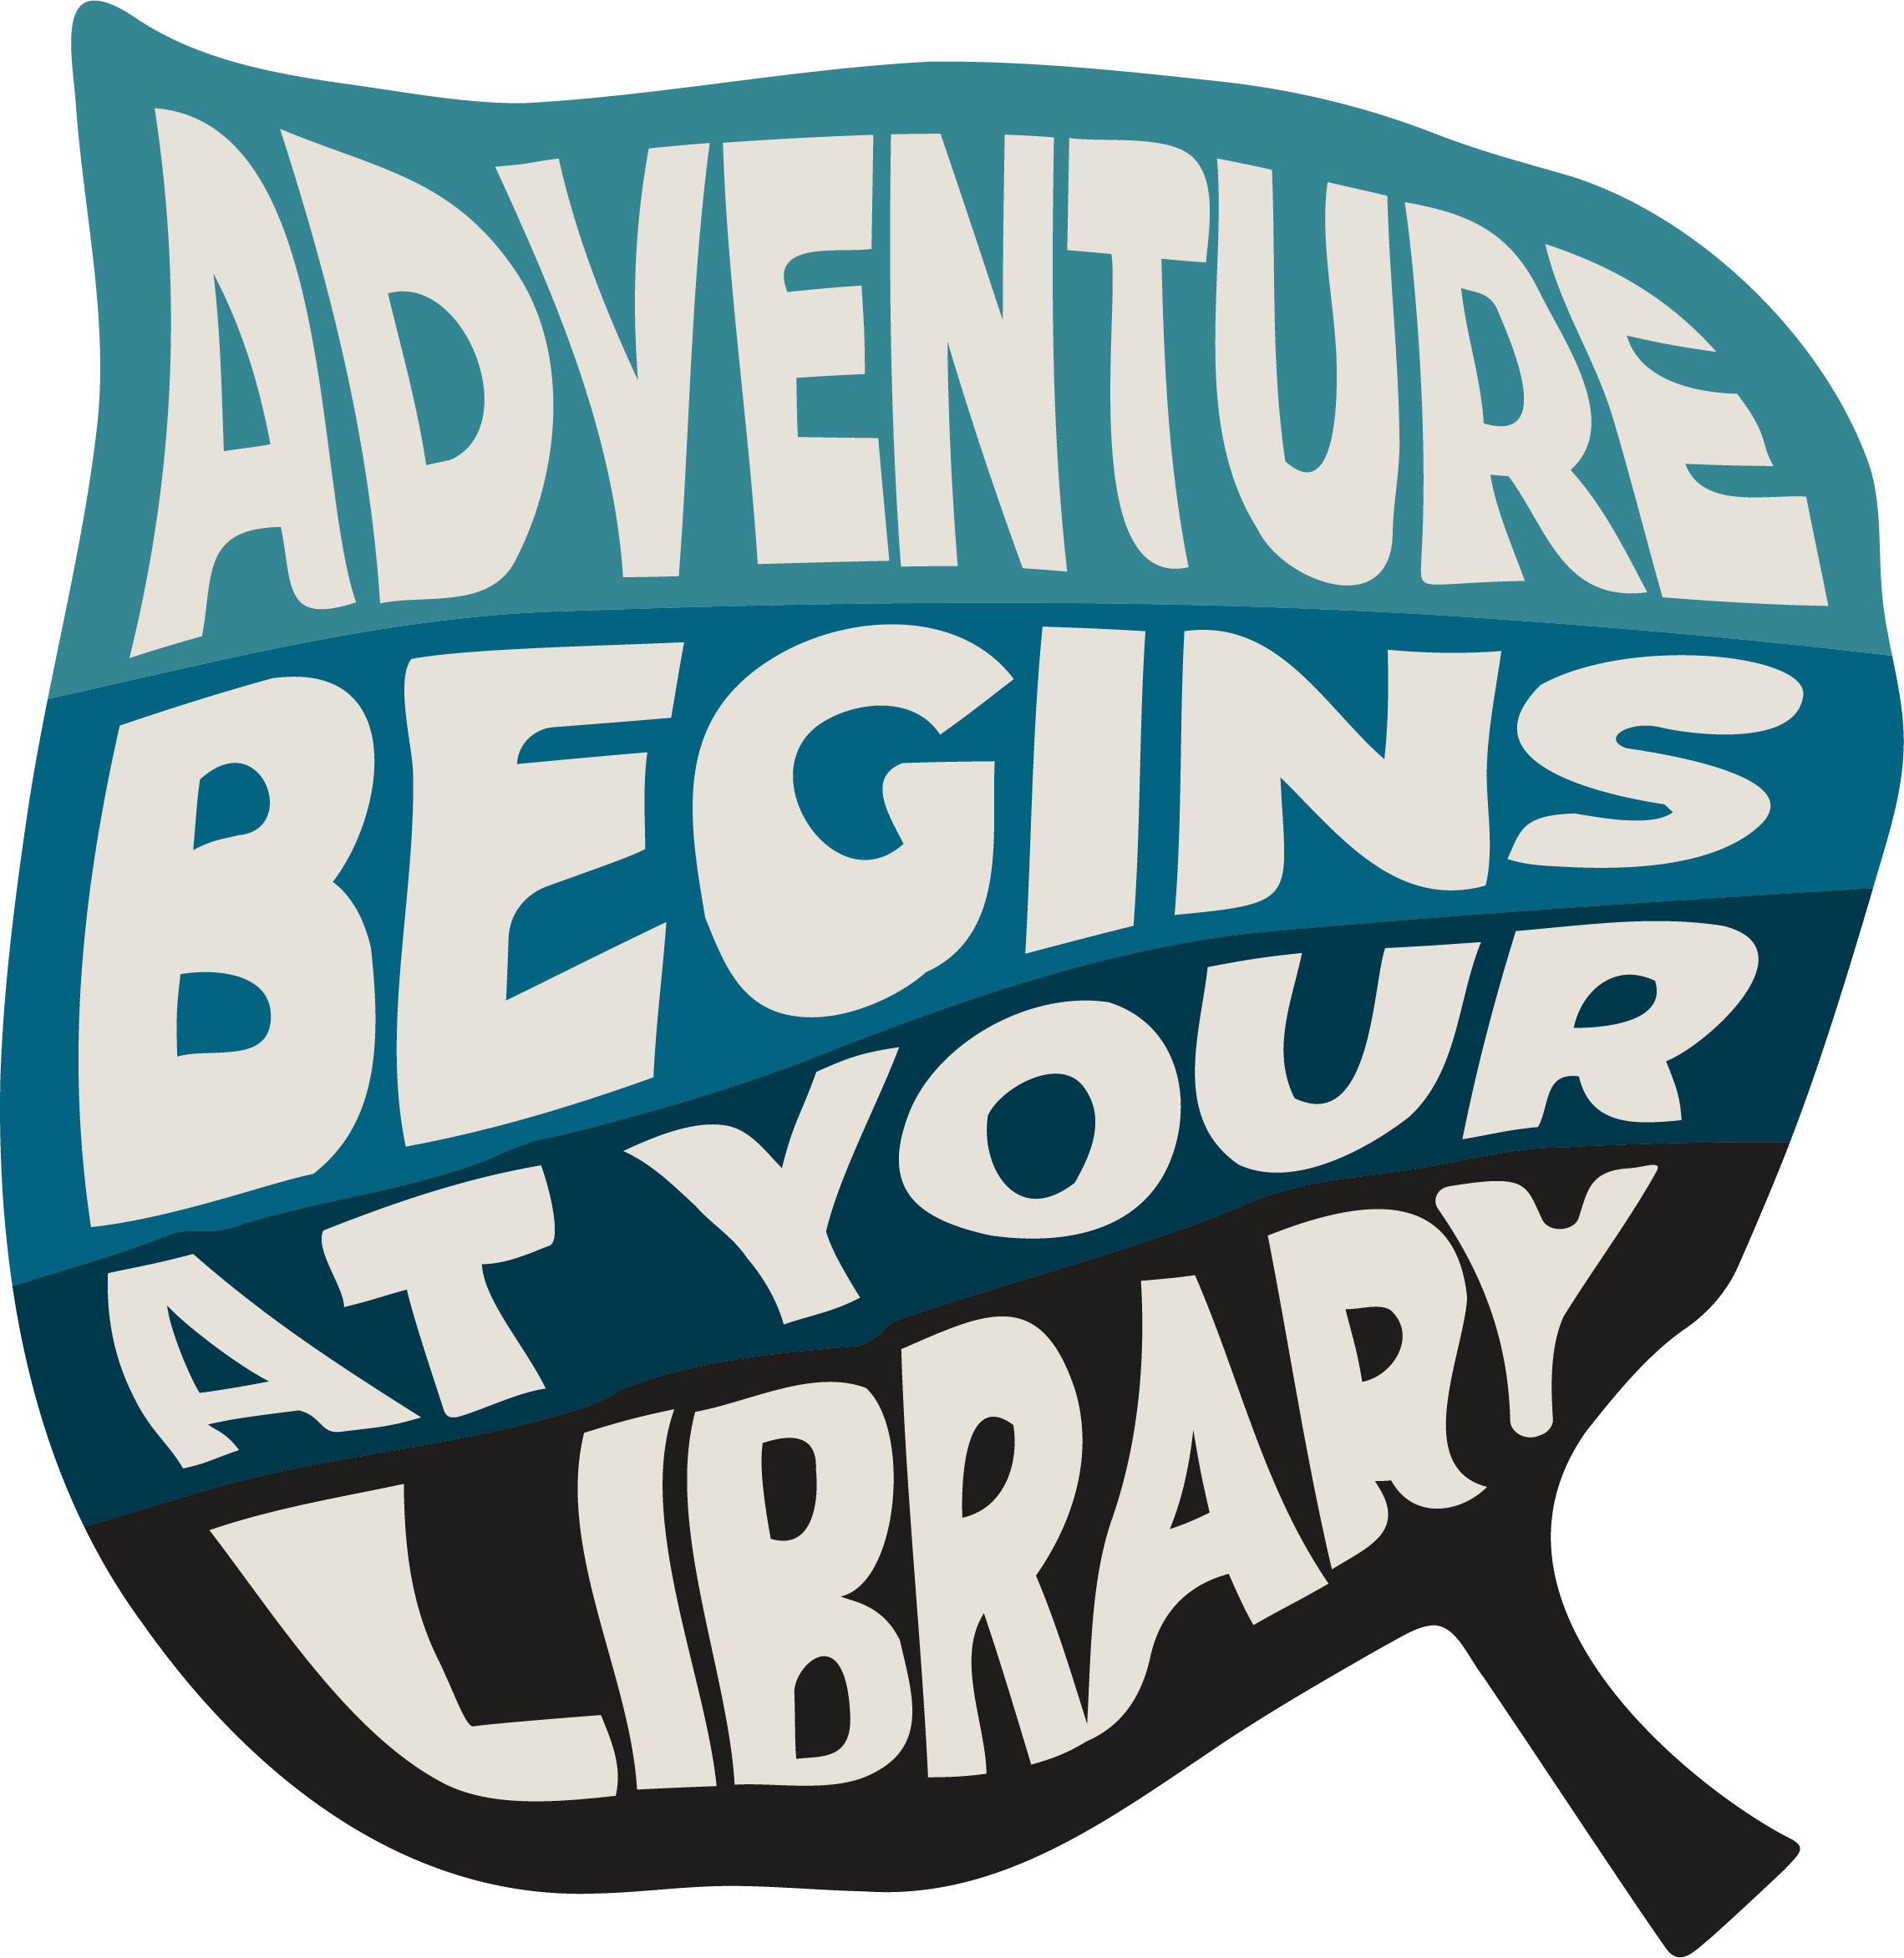 Adventure Begins at Your Library text in a leaf image.